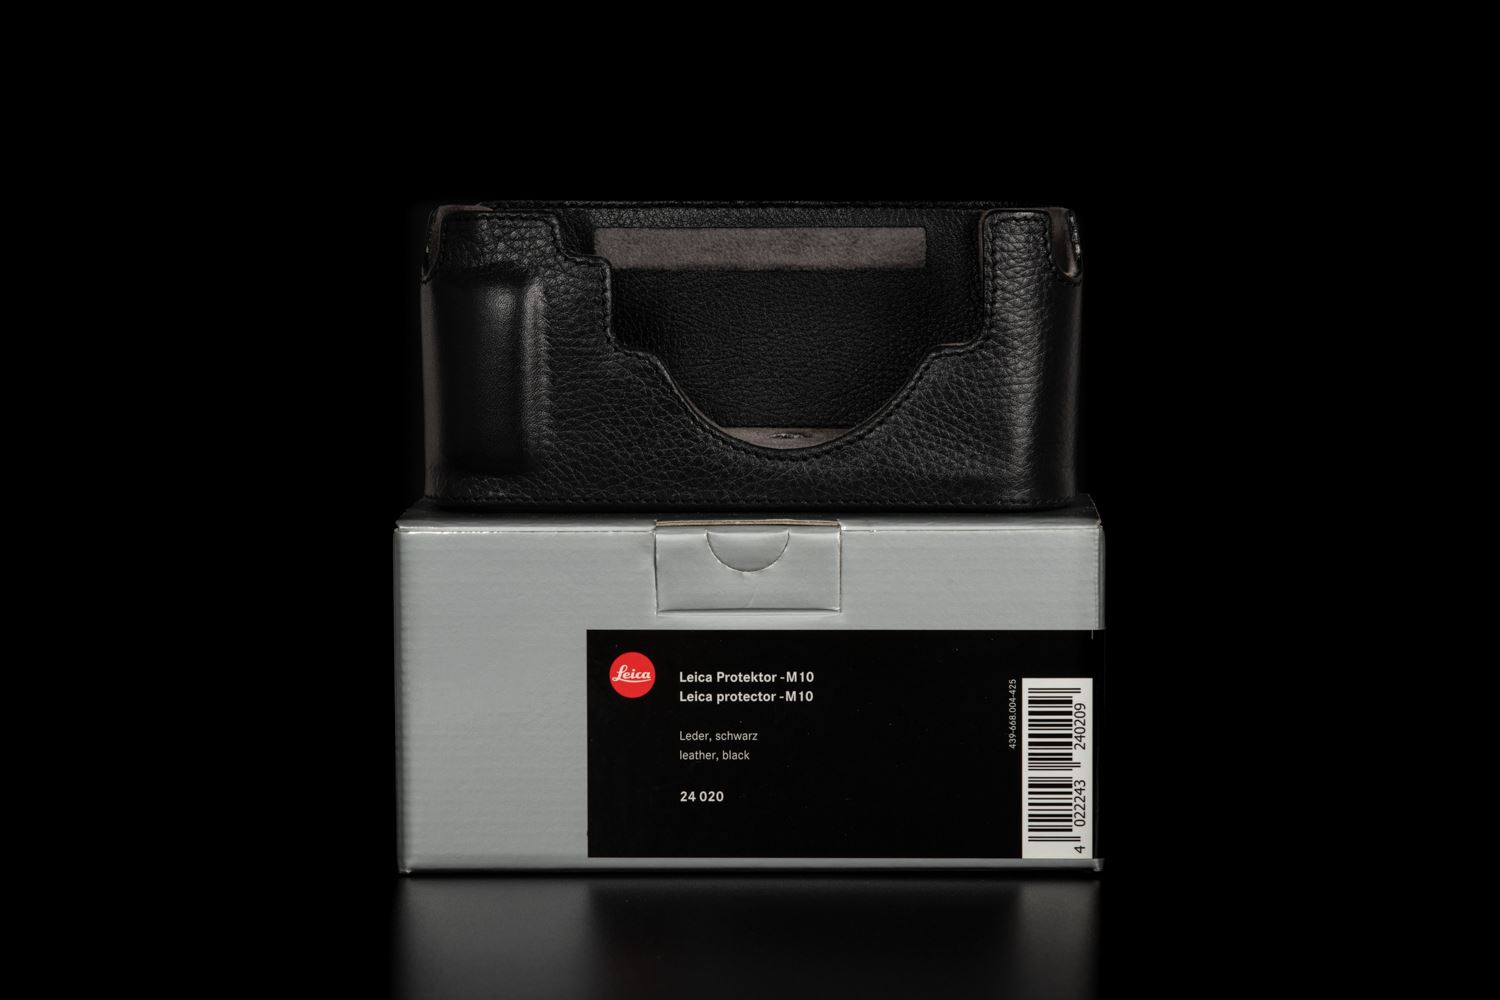 Picture of leica Protector M10, leather, black